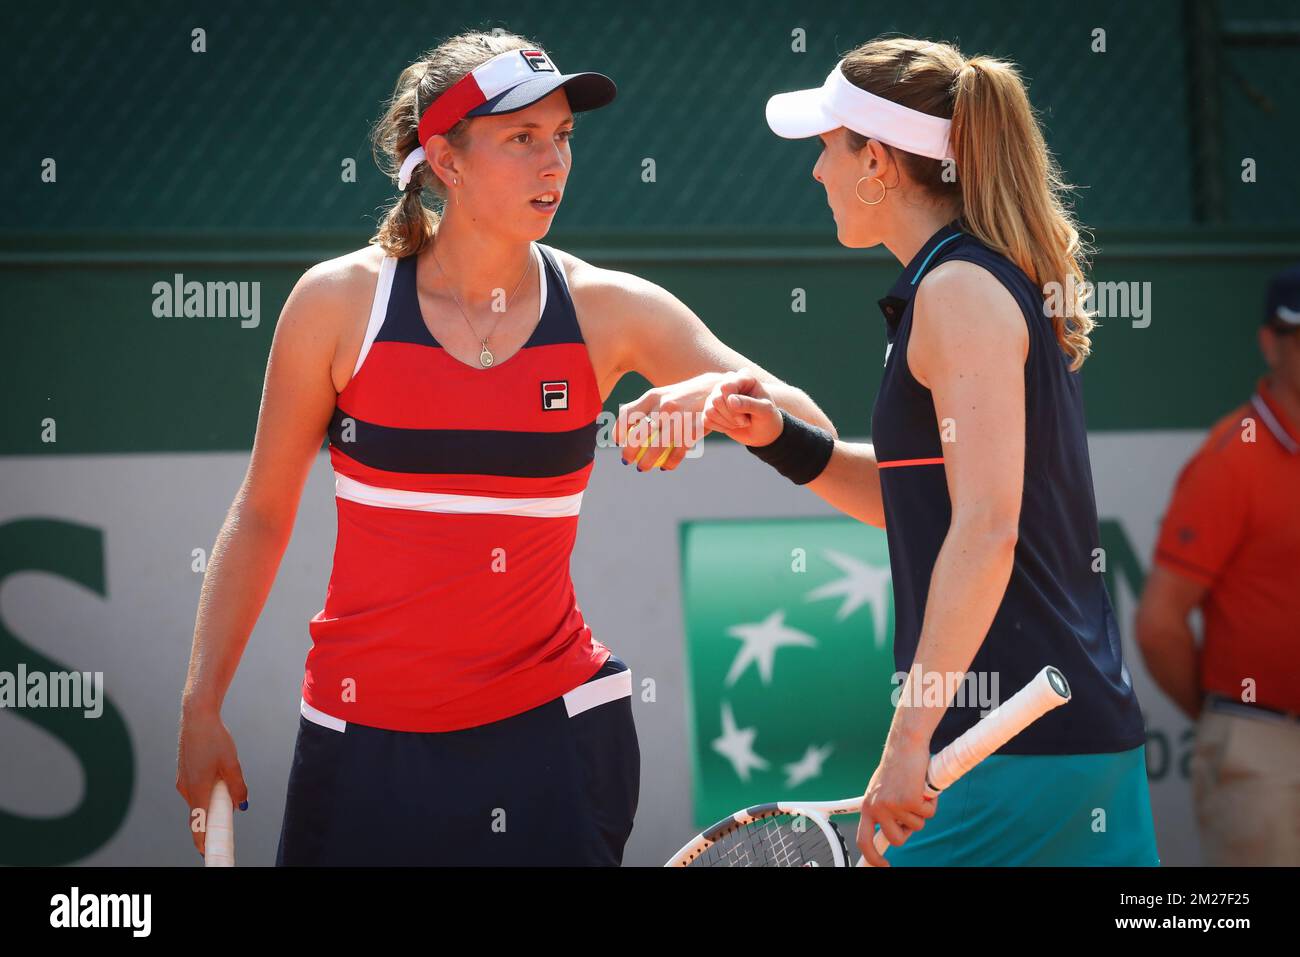 Belgian Elise Mertens and French Alize Cornet pictured during a doubles tennis game between Belgian Elise Mertens and French Alize Cornet versus US Bethanie Mattek-Sands and Czech Lucie Safarova, in the first round of the women's doubles tournament at the Roland Garros French Open tennis tournament, in Paris, France, Thursday 01 June 2017. The main table Roland Garros Grand Slam takes place from 29 May to 11 June 2017. BELGA PHOTO VIRGINIE LEFOUR Stock Photo